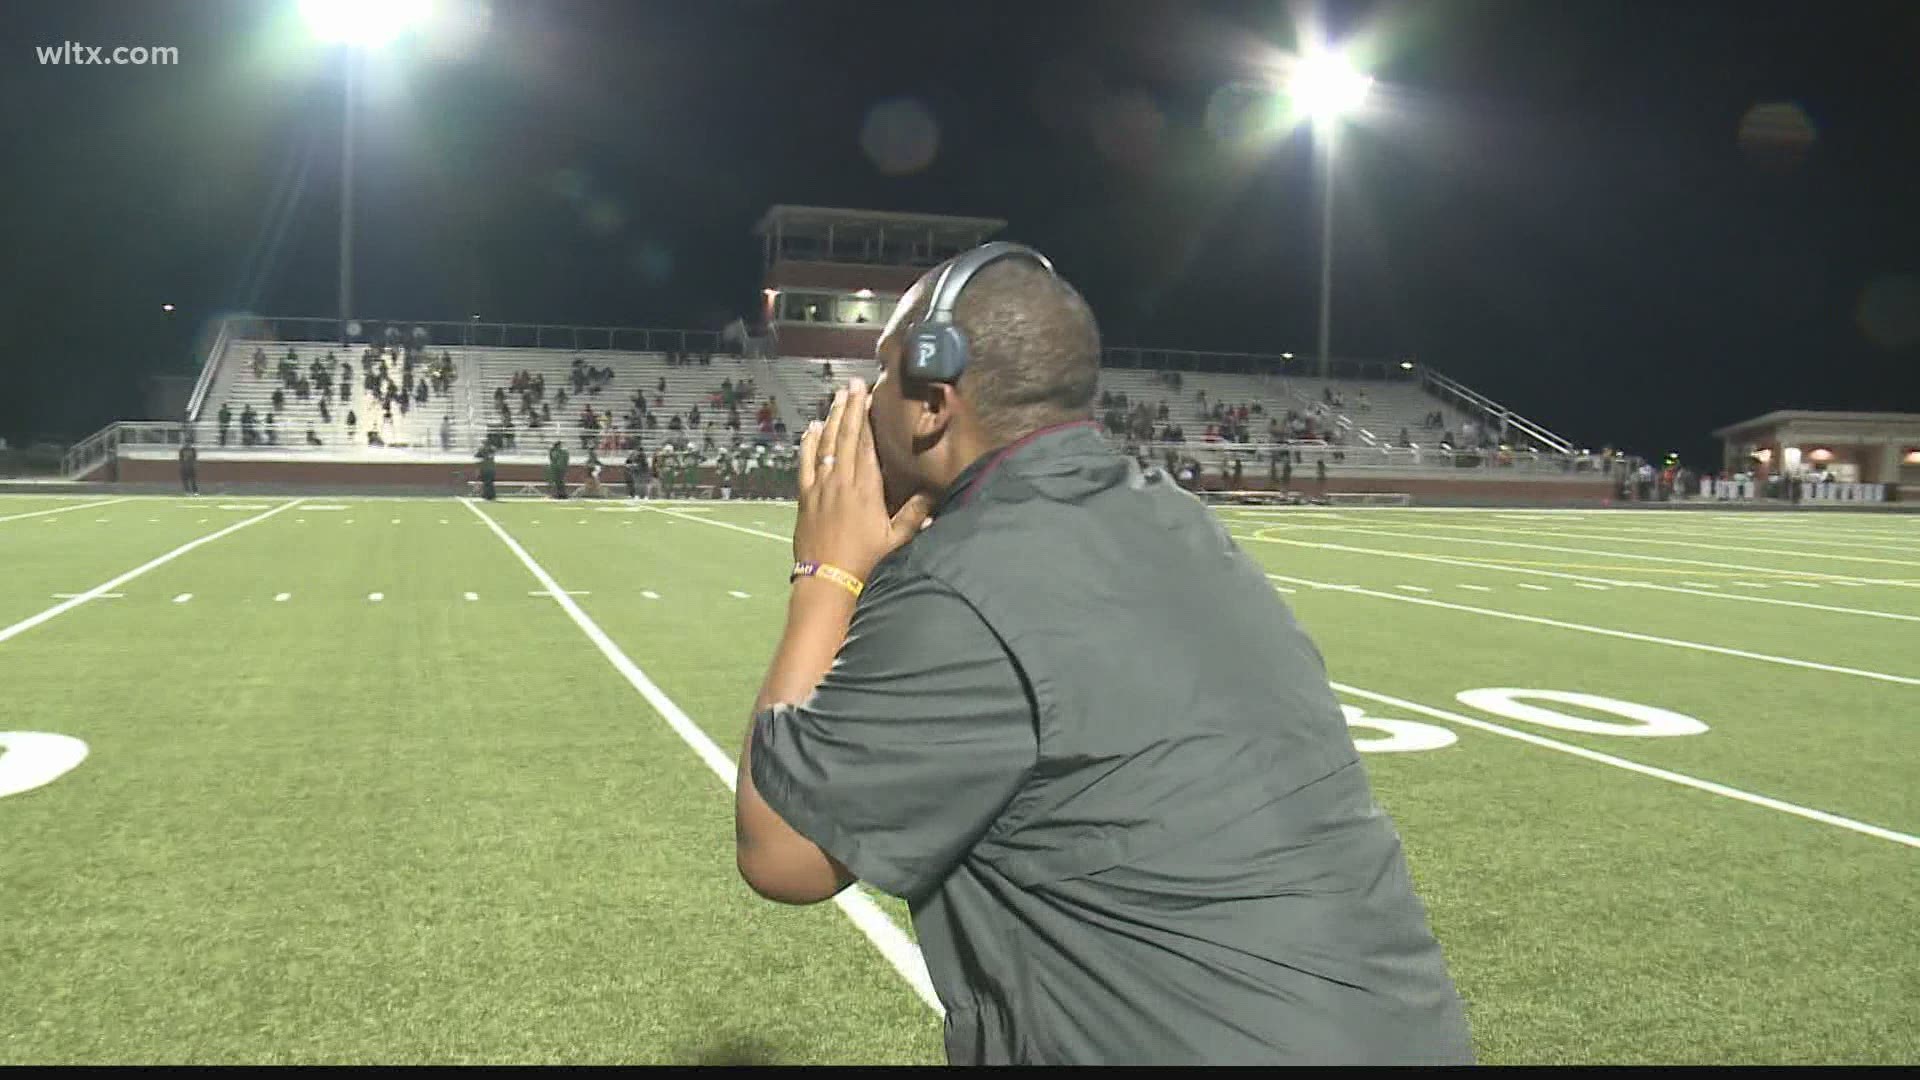 Highlights from Thursday night's contest between Columbia and Eau Claire.